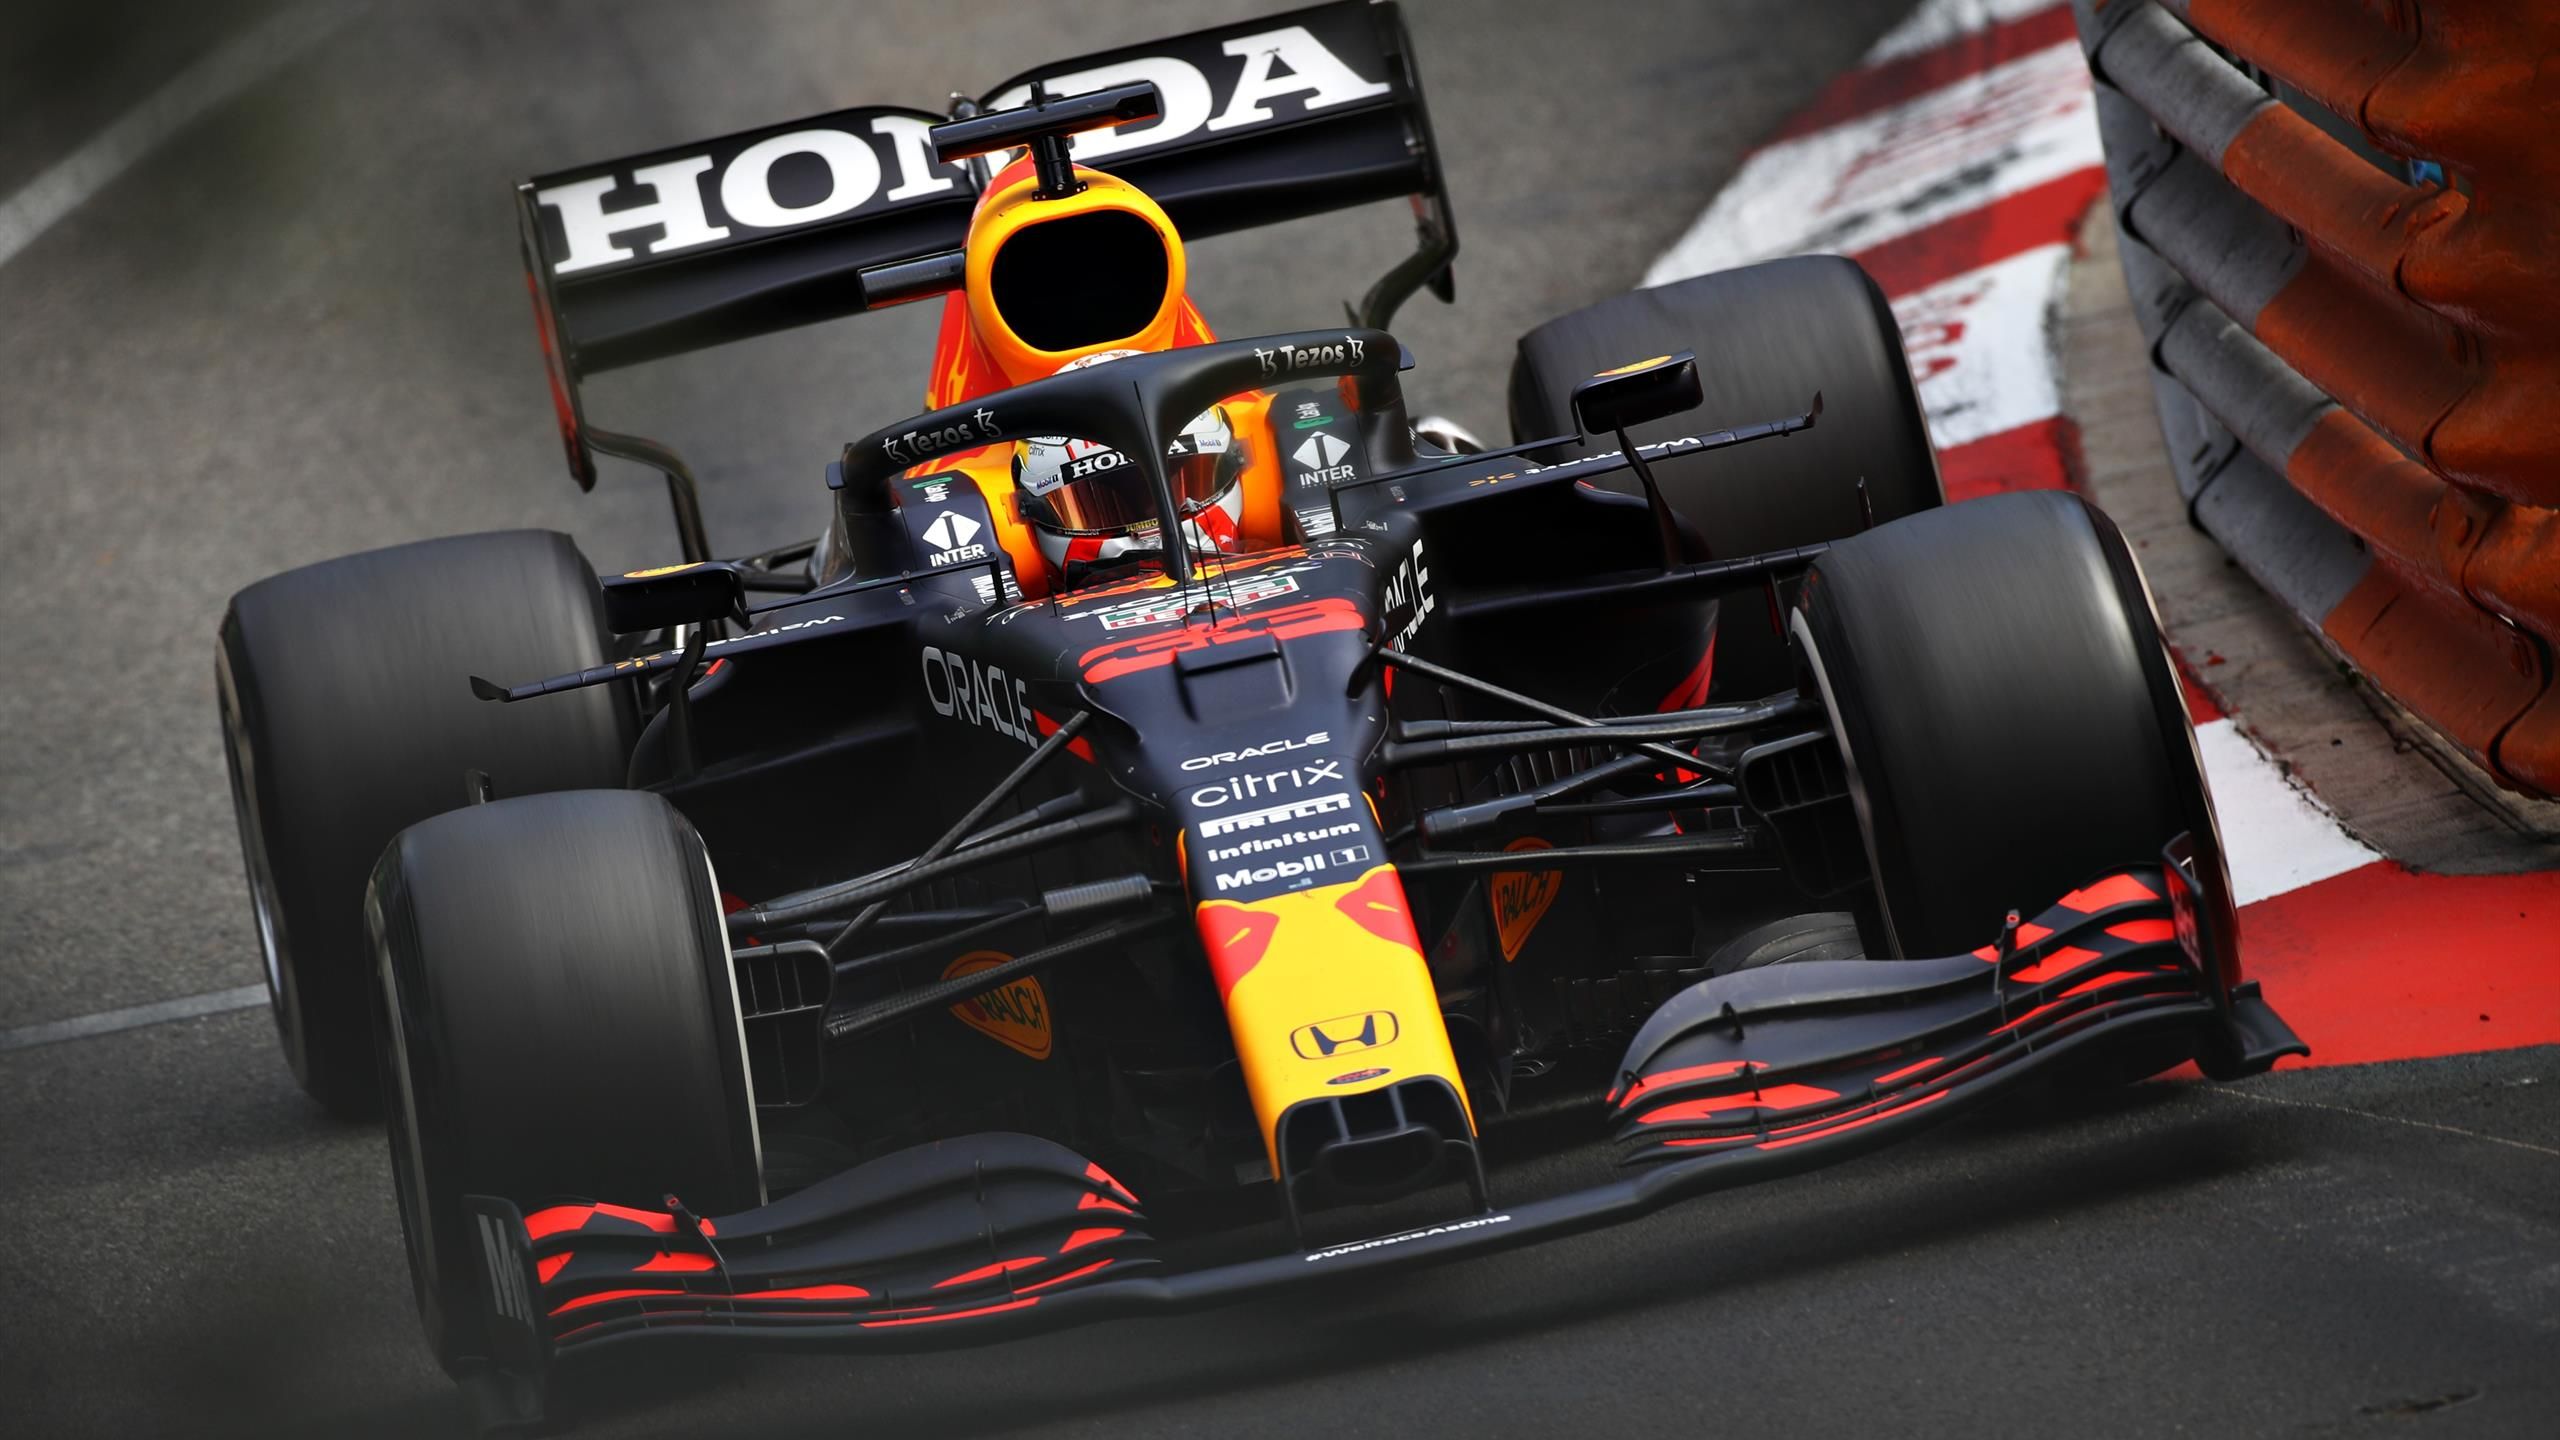 F1 Monaco Grand Prix 21 Red Bull S Max Verstappen Storms To Victory To Take Championship Lead From Lewis Hamilton Eurosport